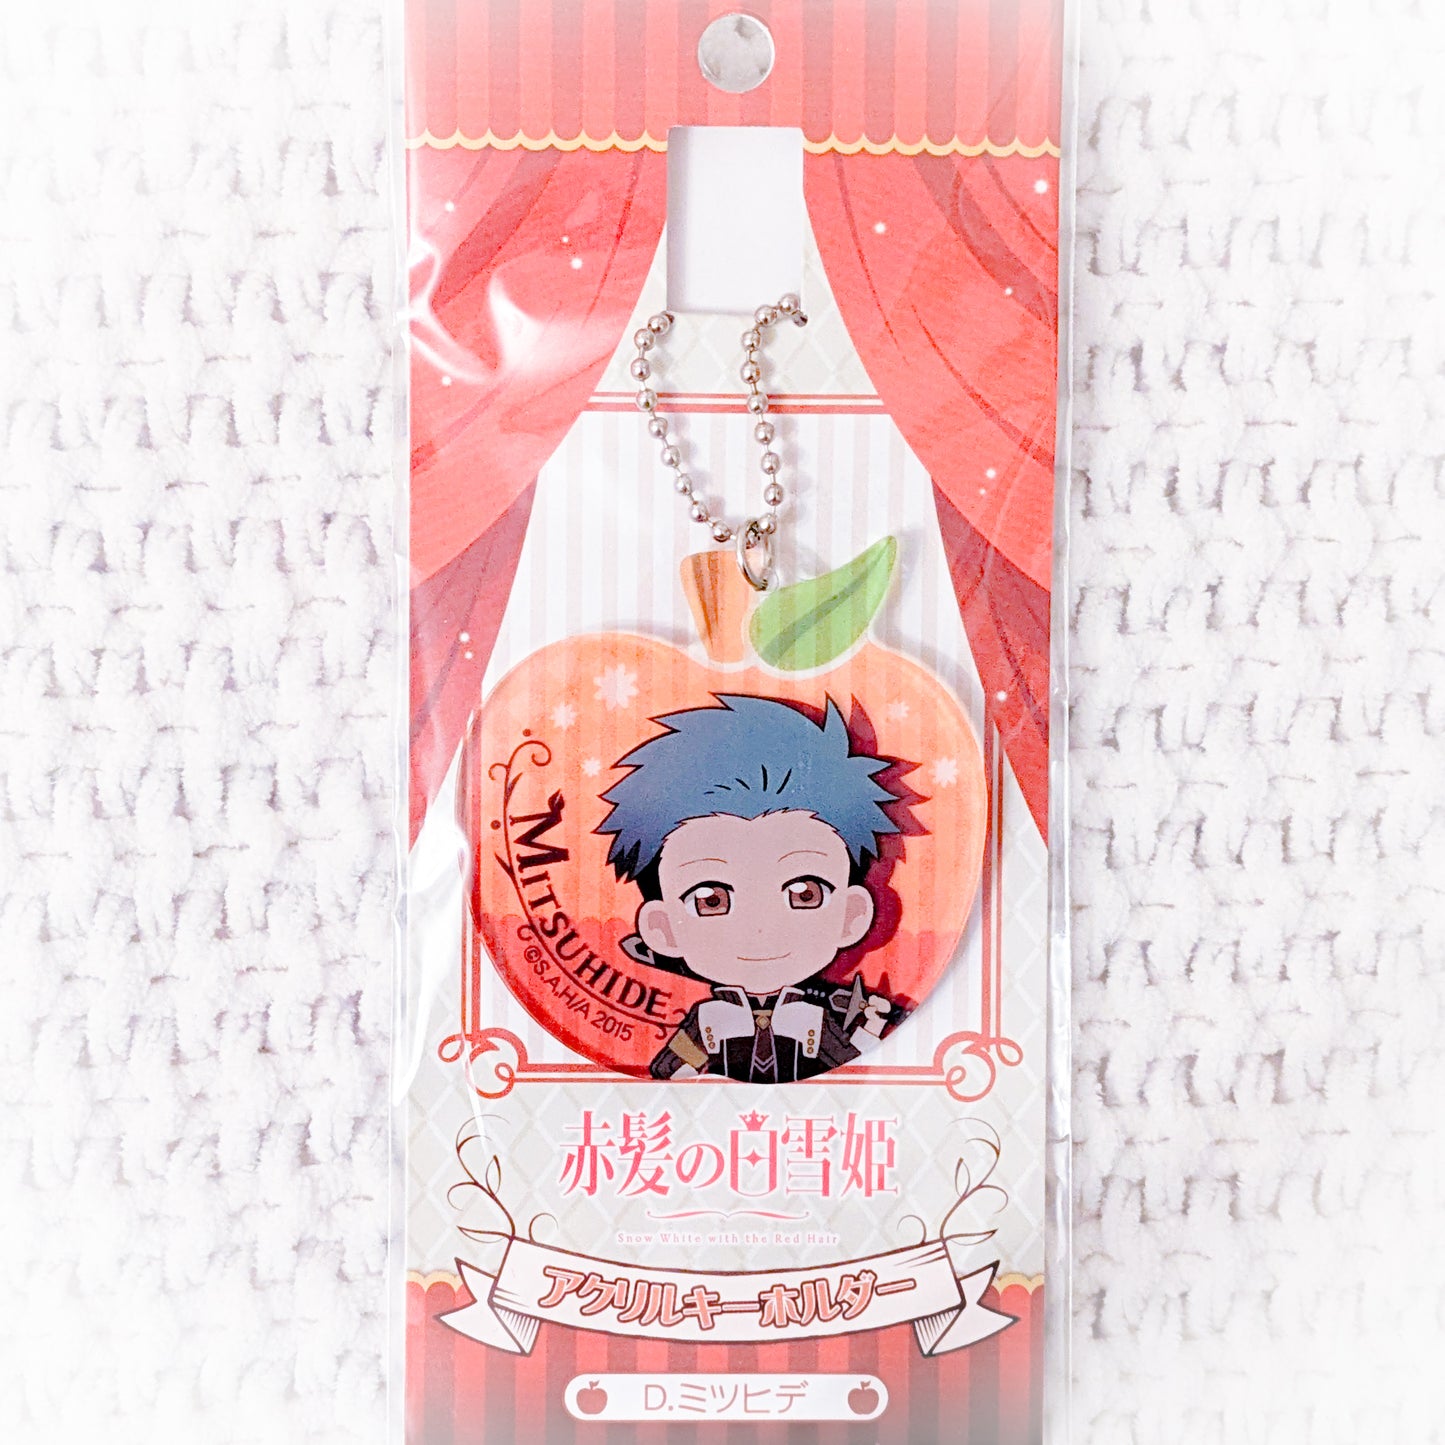 Mitsuhide Lowen - Snow White With The Red Hair Anime Apple Acrylic Keychain Charm